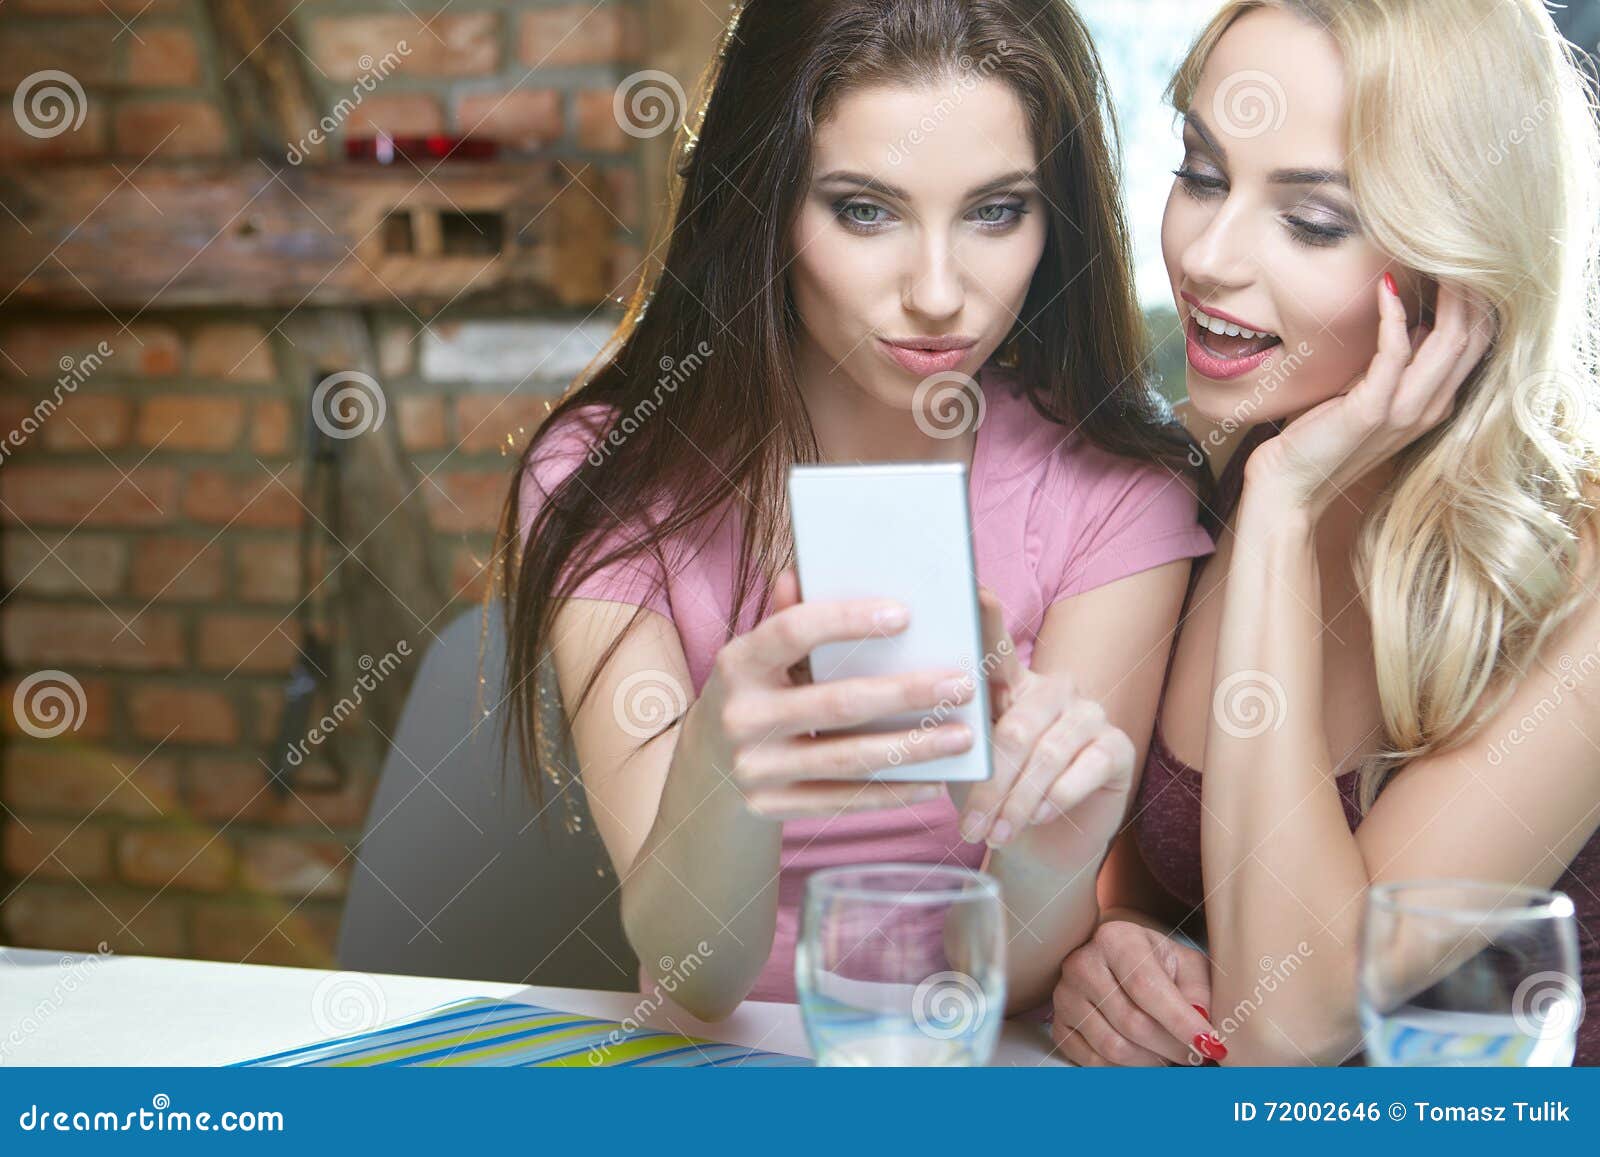 Girls Taking Pictures on the Phone at Home Stock Photo - Image of women ...